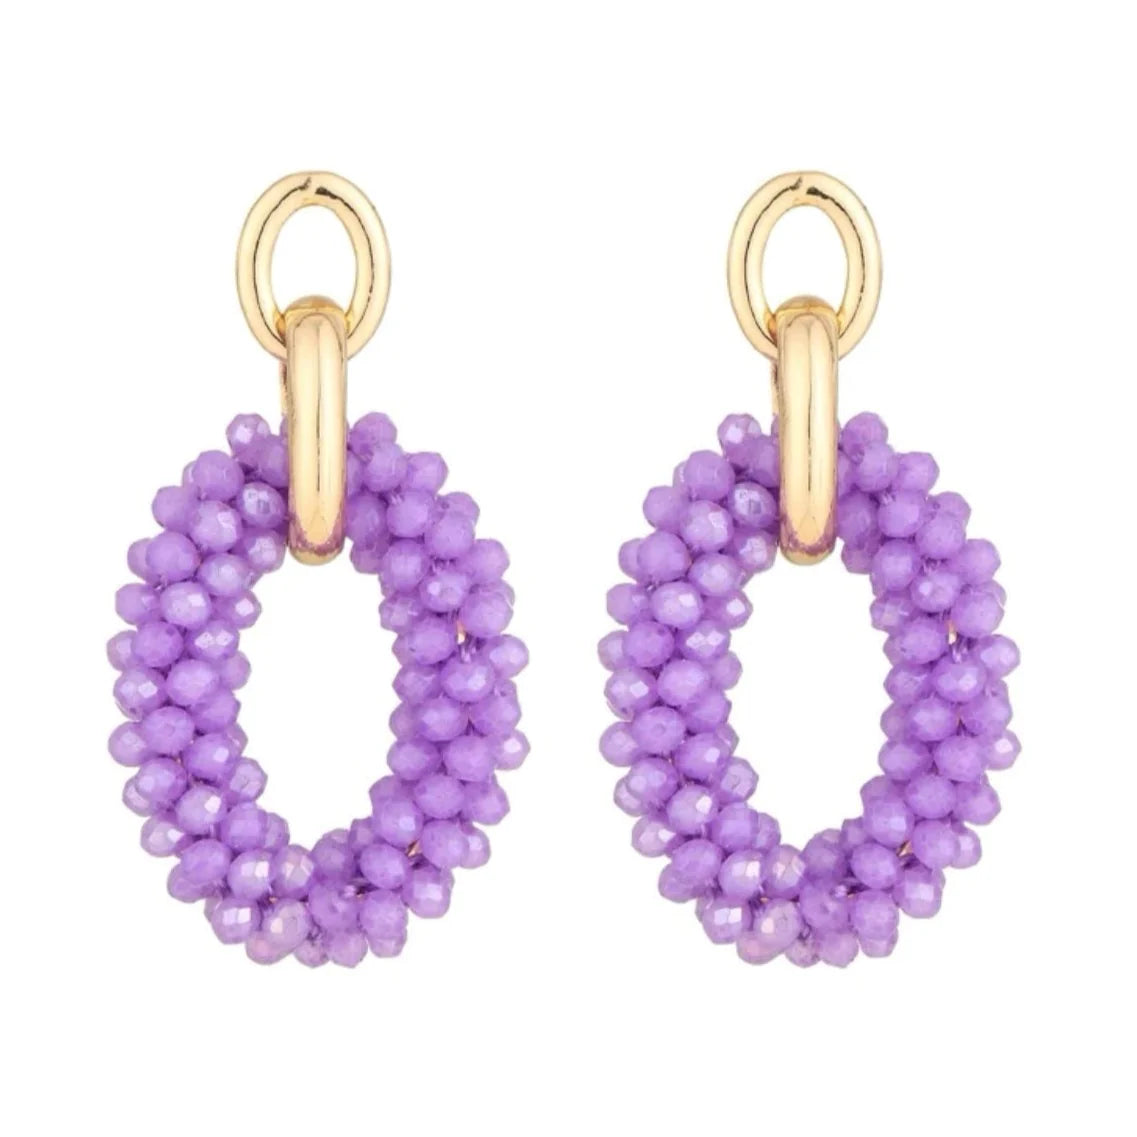 Lilac Flicky Beaded Statement Earrings